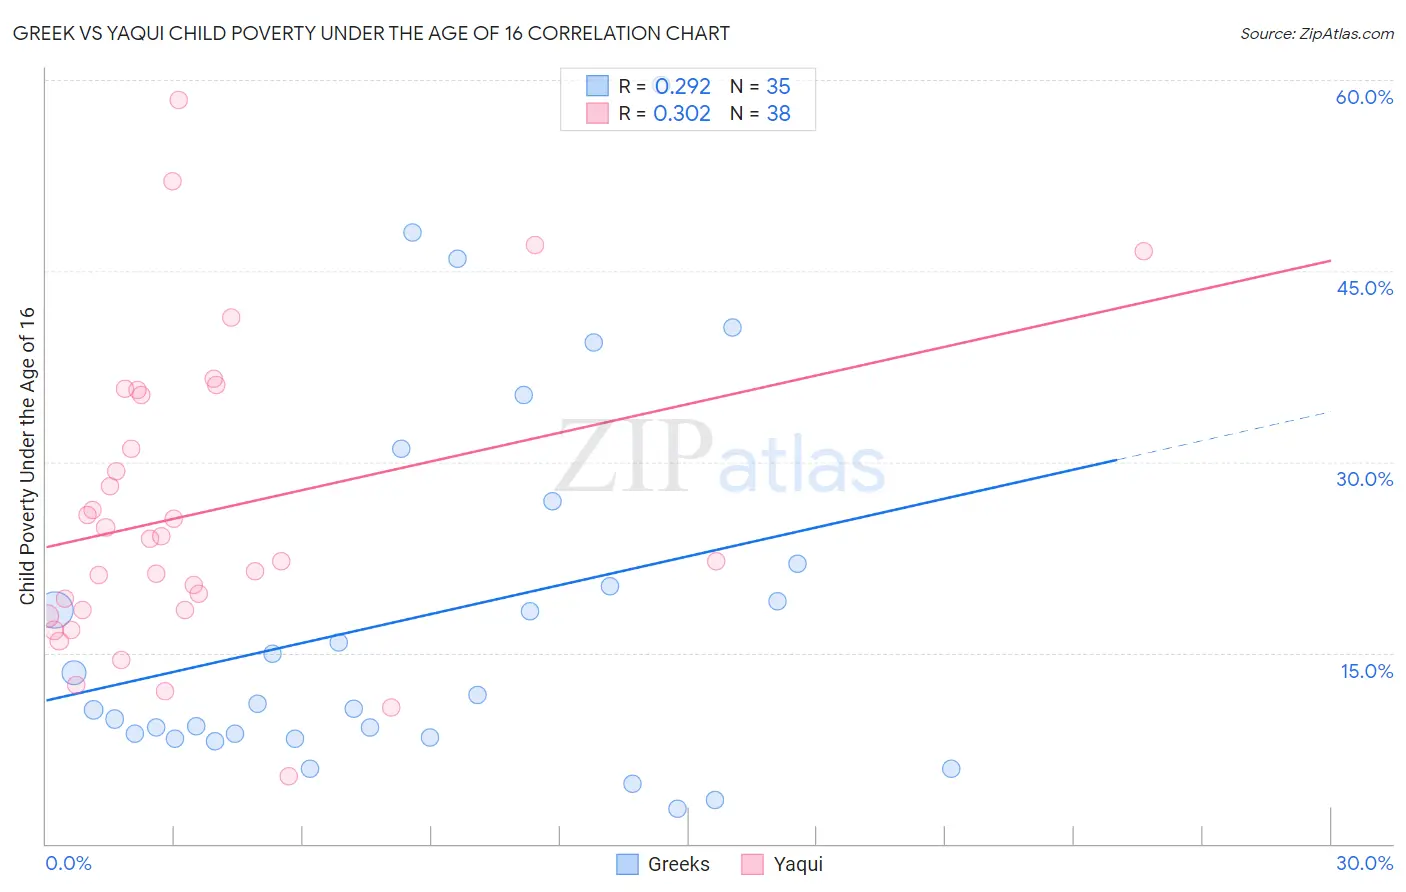 Greek vs Yaqui Child Poverty Under the Age of 16